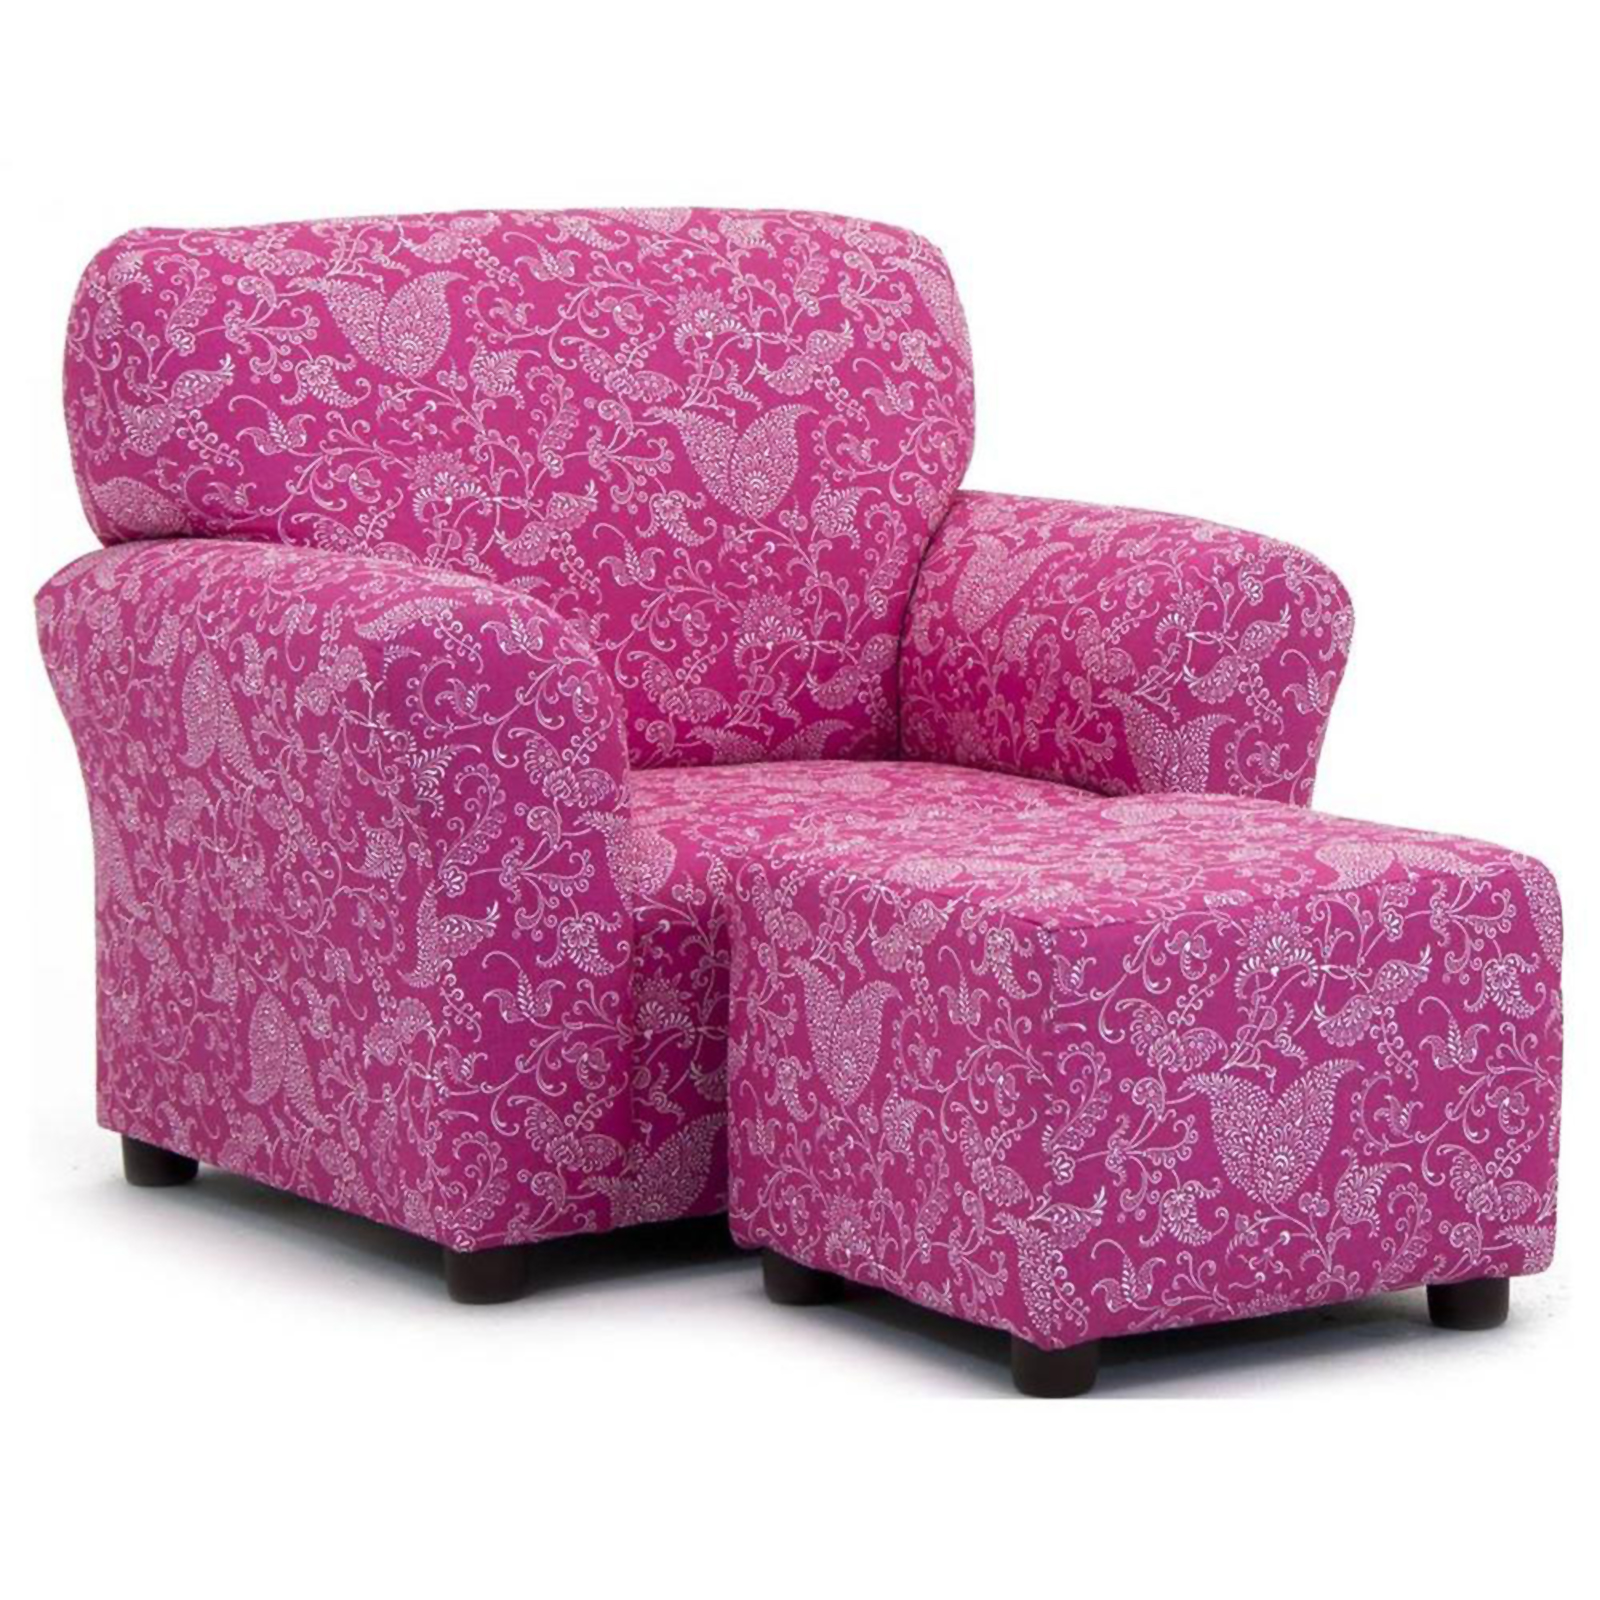 Kidz World Small Paisley 30" Kids' Club Chair with Ottoman - Candy Pink